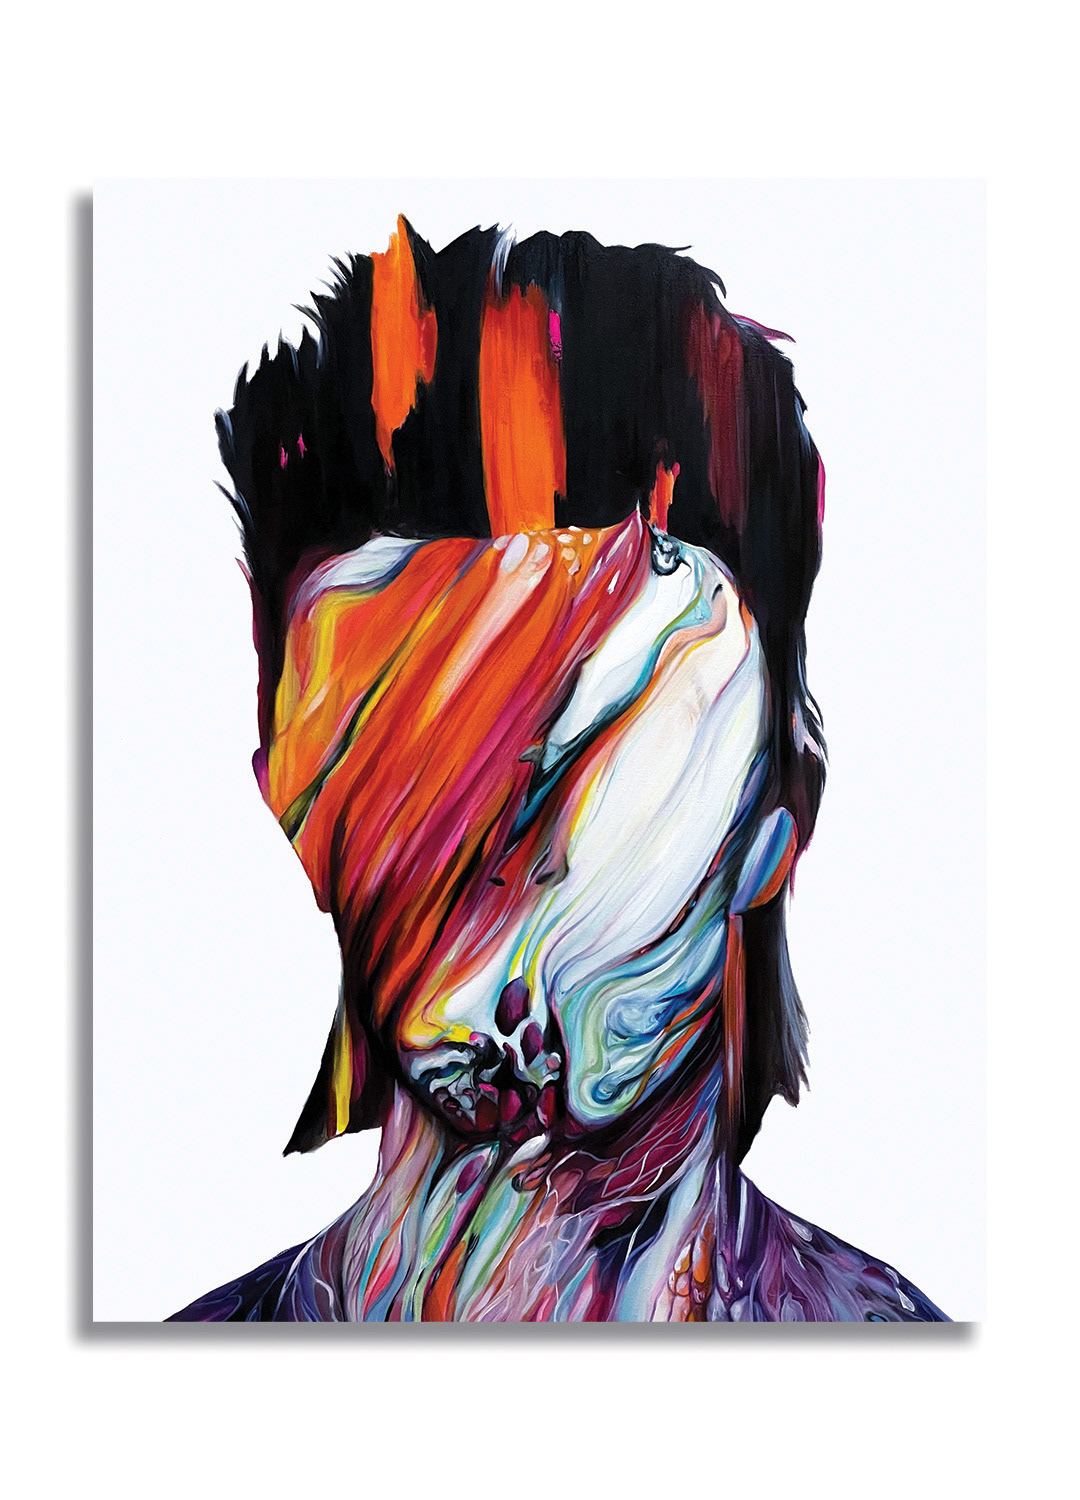 abstraction aladdin sane david bowie Icon norris yim oil painting   portrait rock n roll Singer